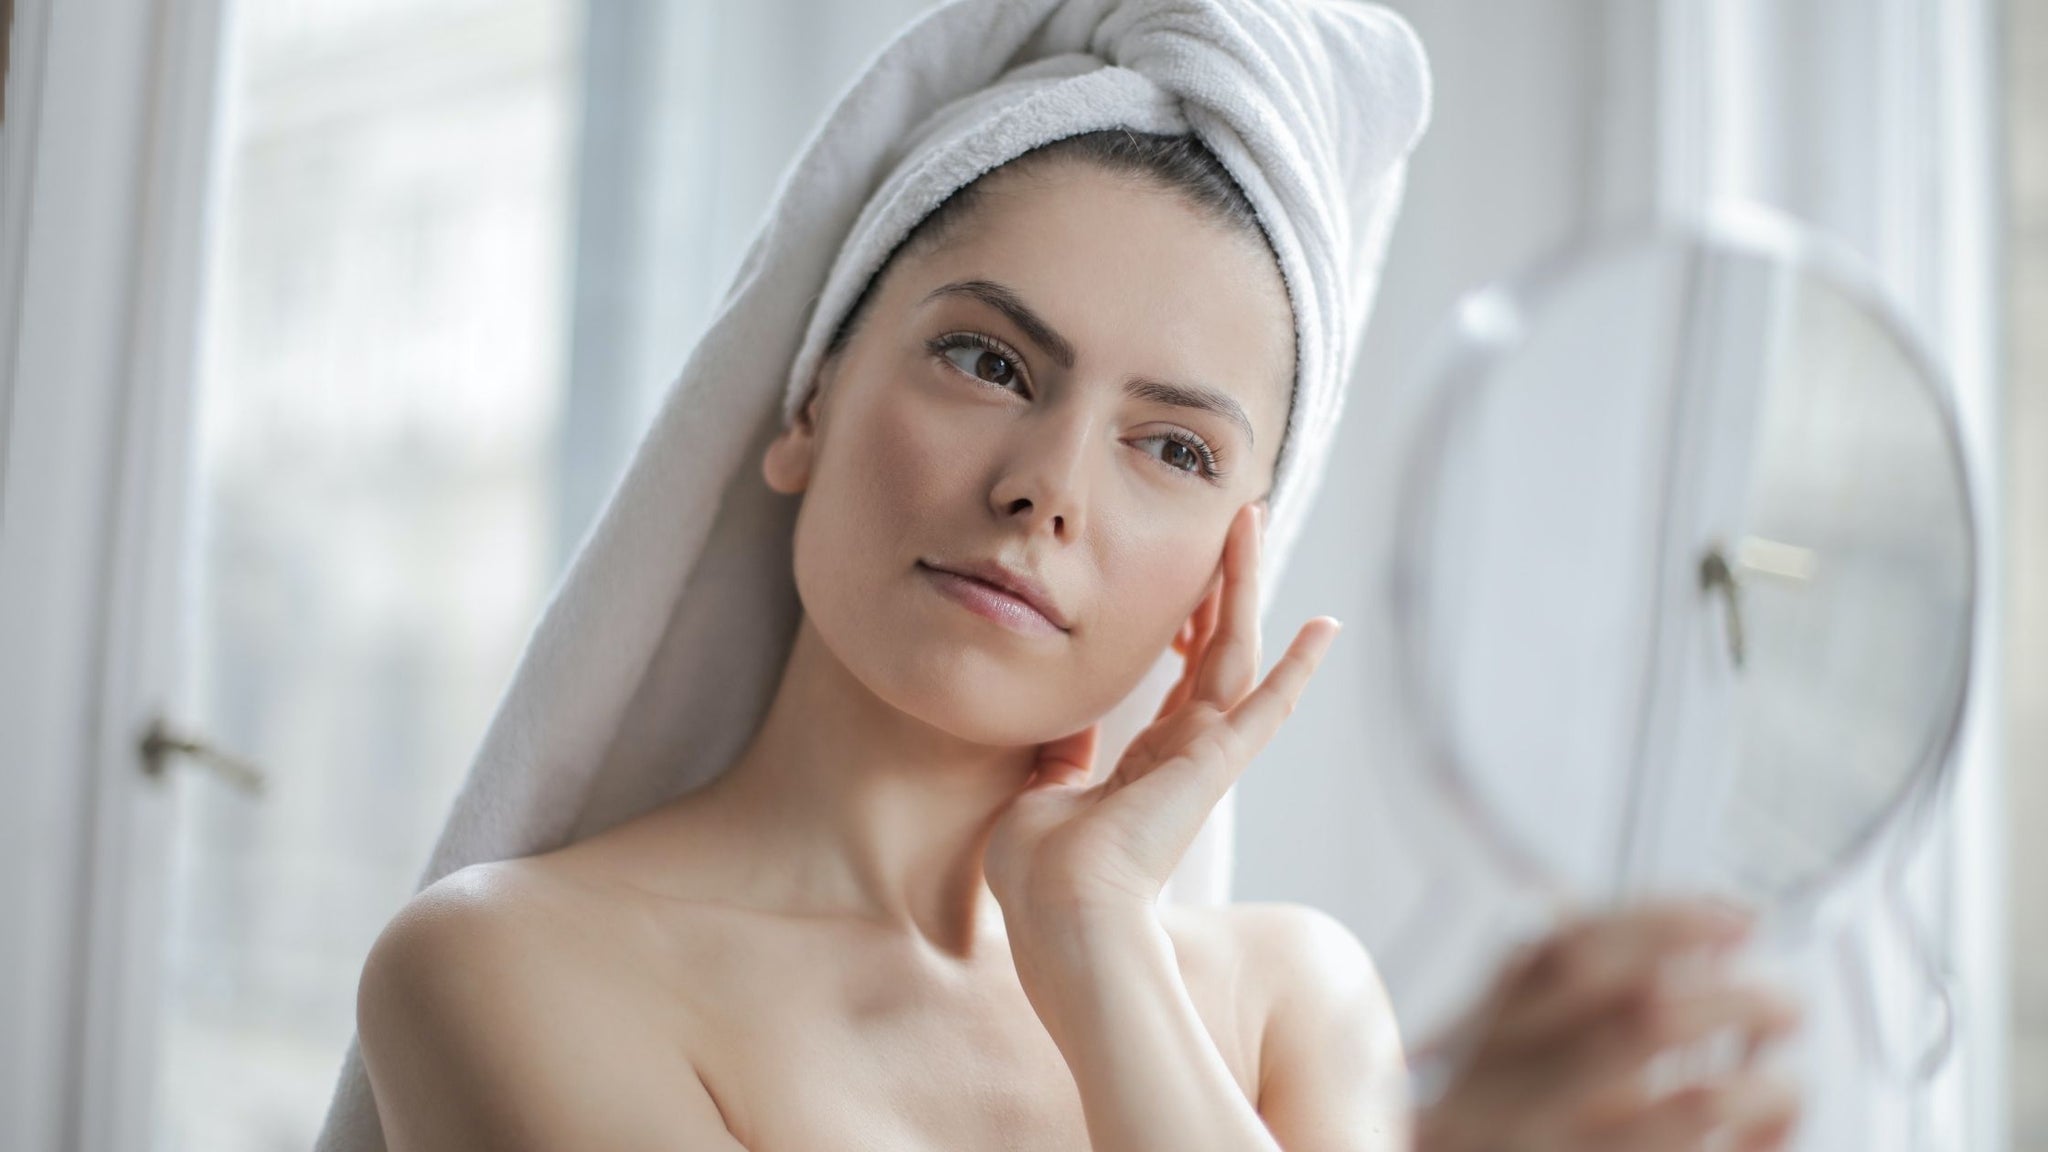 Smooth Skin is Everyone’s Dream. Here’s How You Can Make this a Reality!